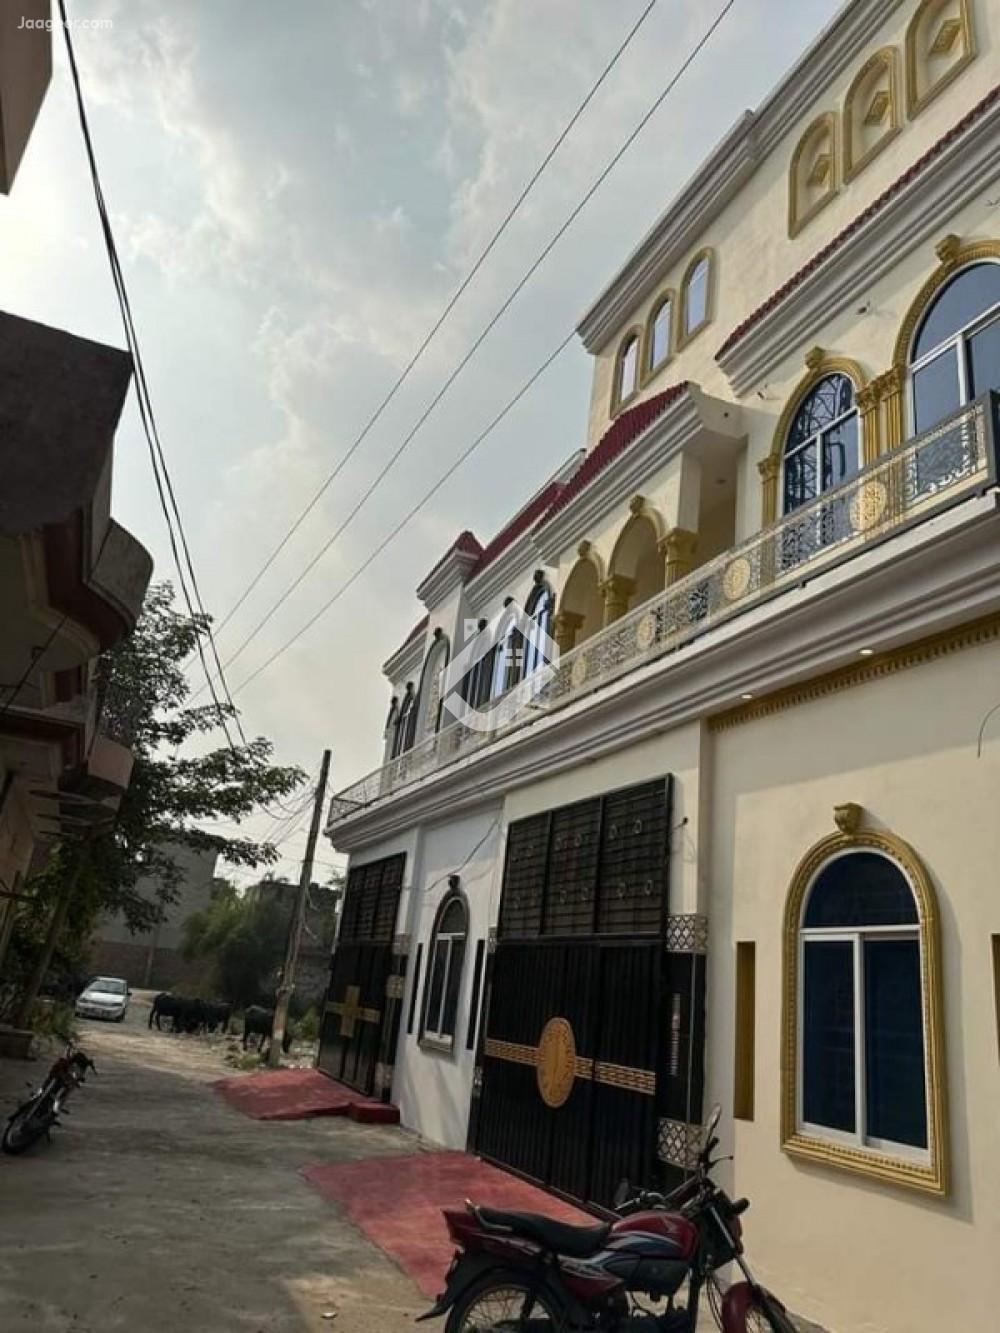 View  5.25 Marla Double Storey House For Sale In Lahore Road  Al Noor Park  in Lahore Road , Sheikhupura